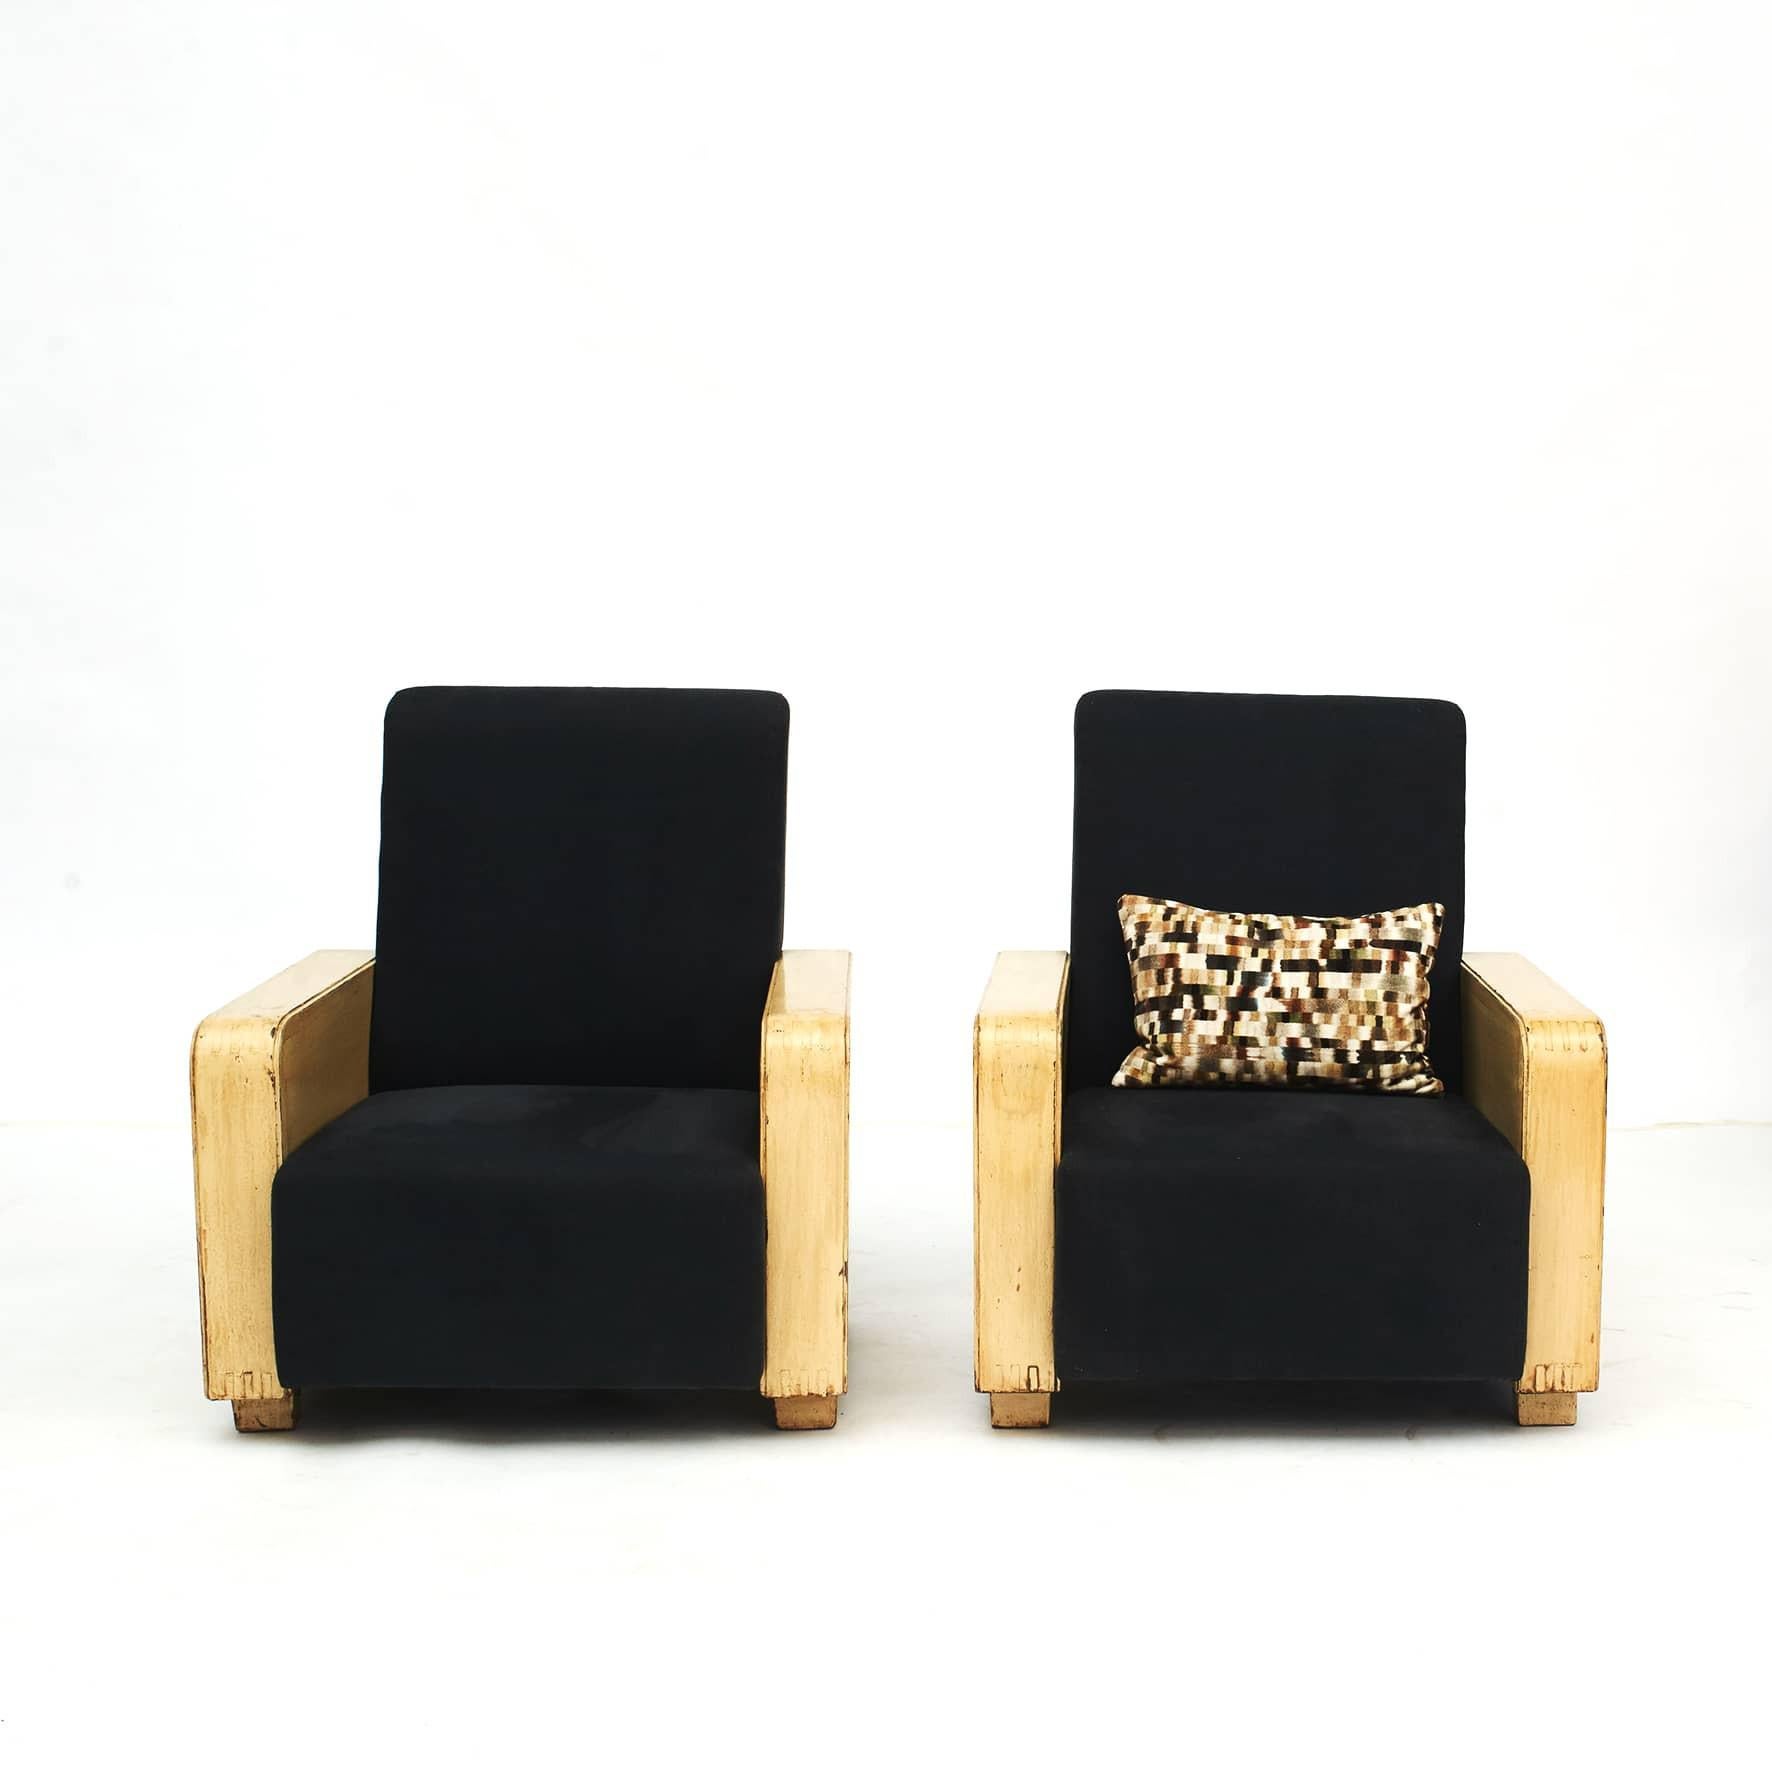 Pair of decorative Chinese art deco easy chairs. The straight wooden armrests with yellow lacquer creates an expressive contrast with the subtle black linen fabric upholstery.
The original yellow lacquer remains in a very good vintage condition and